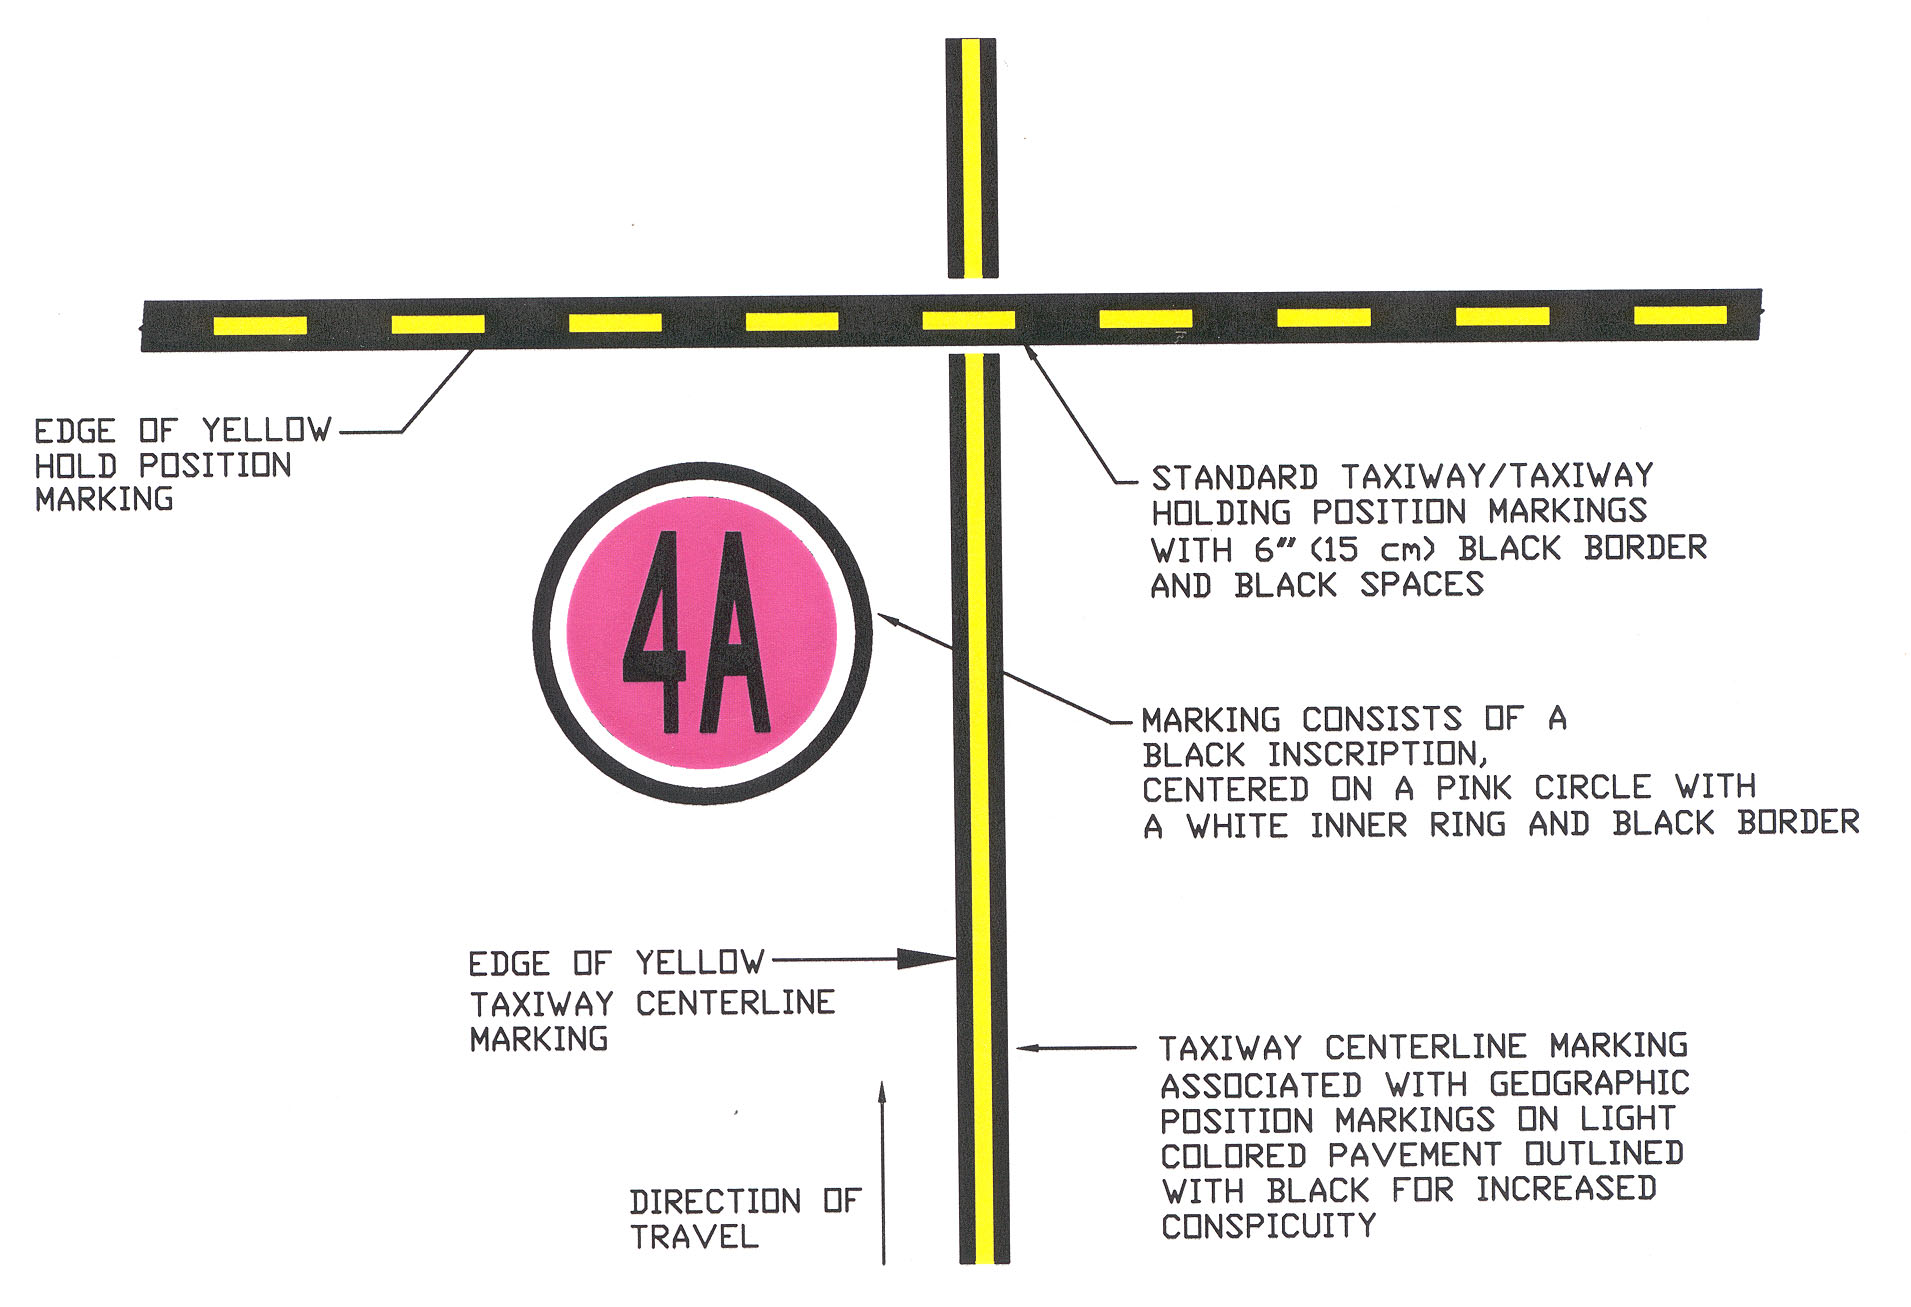 A graphic depicting geographic position markings at points along low visibility taxi routes designated in the airport's SMGCS plan.